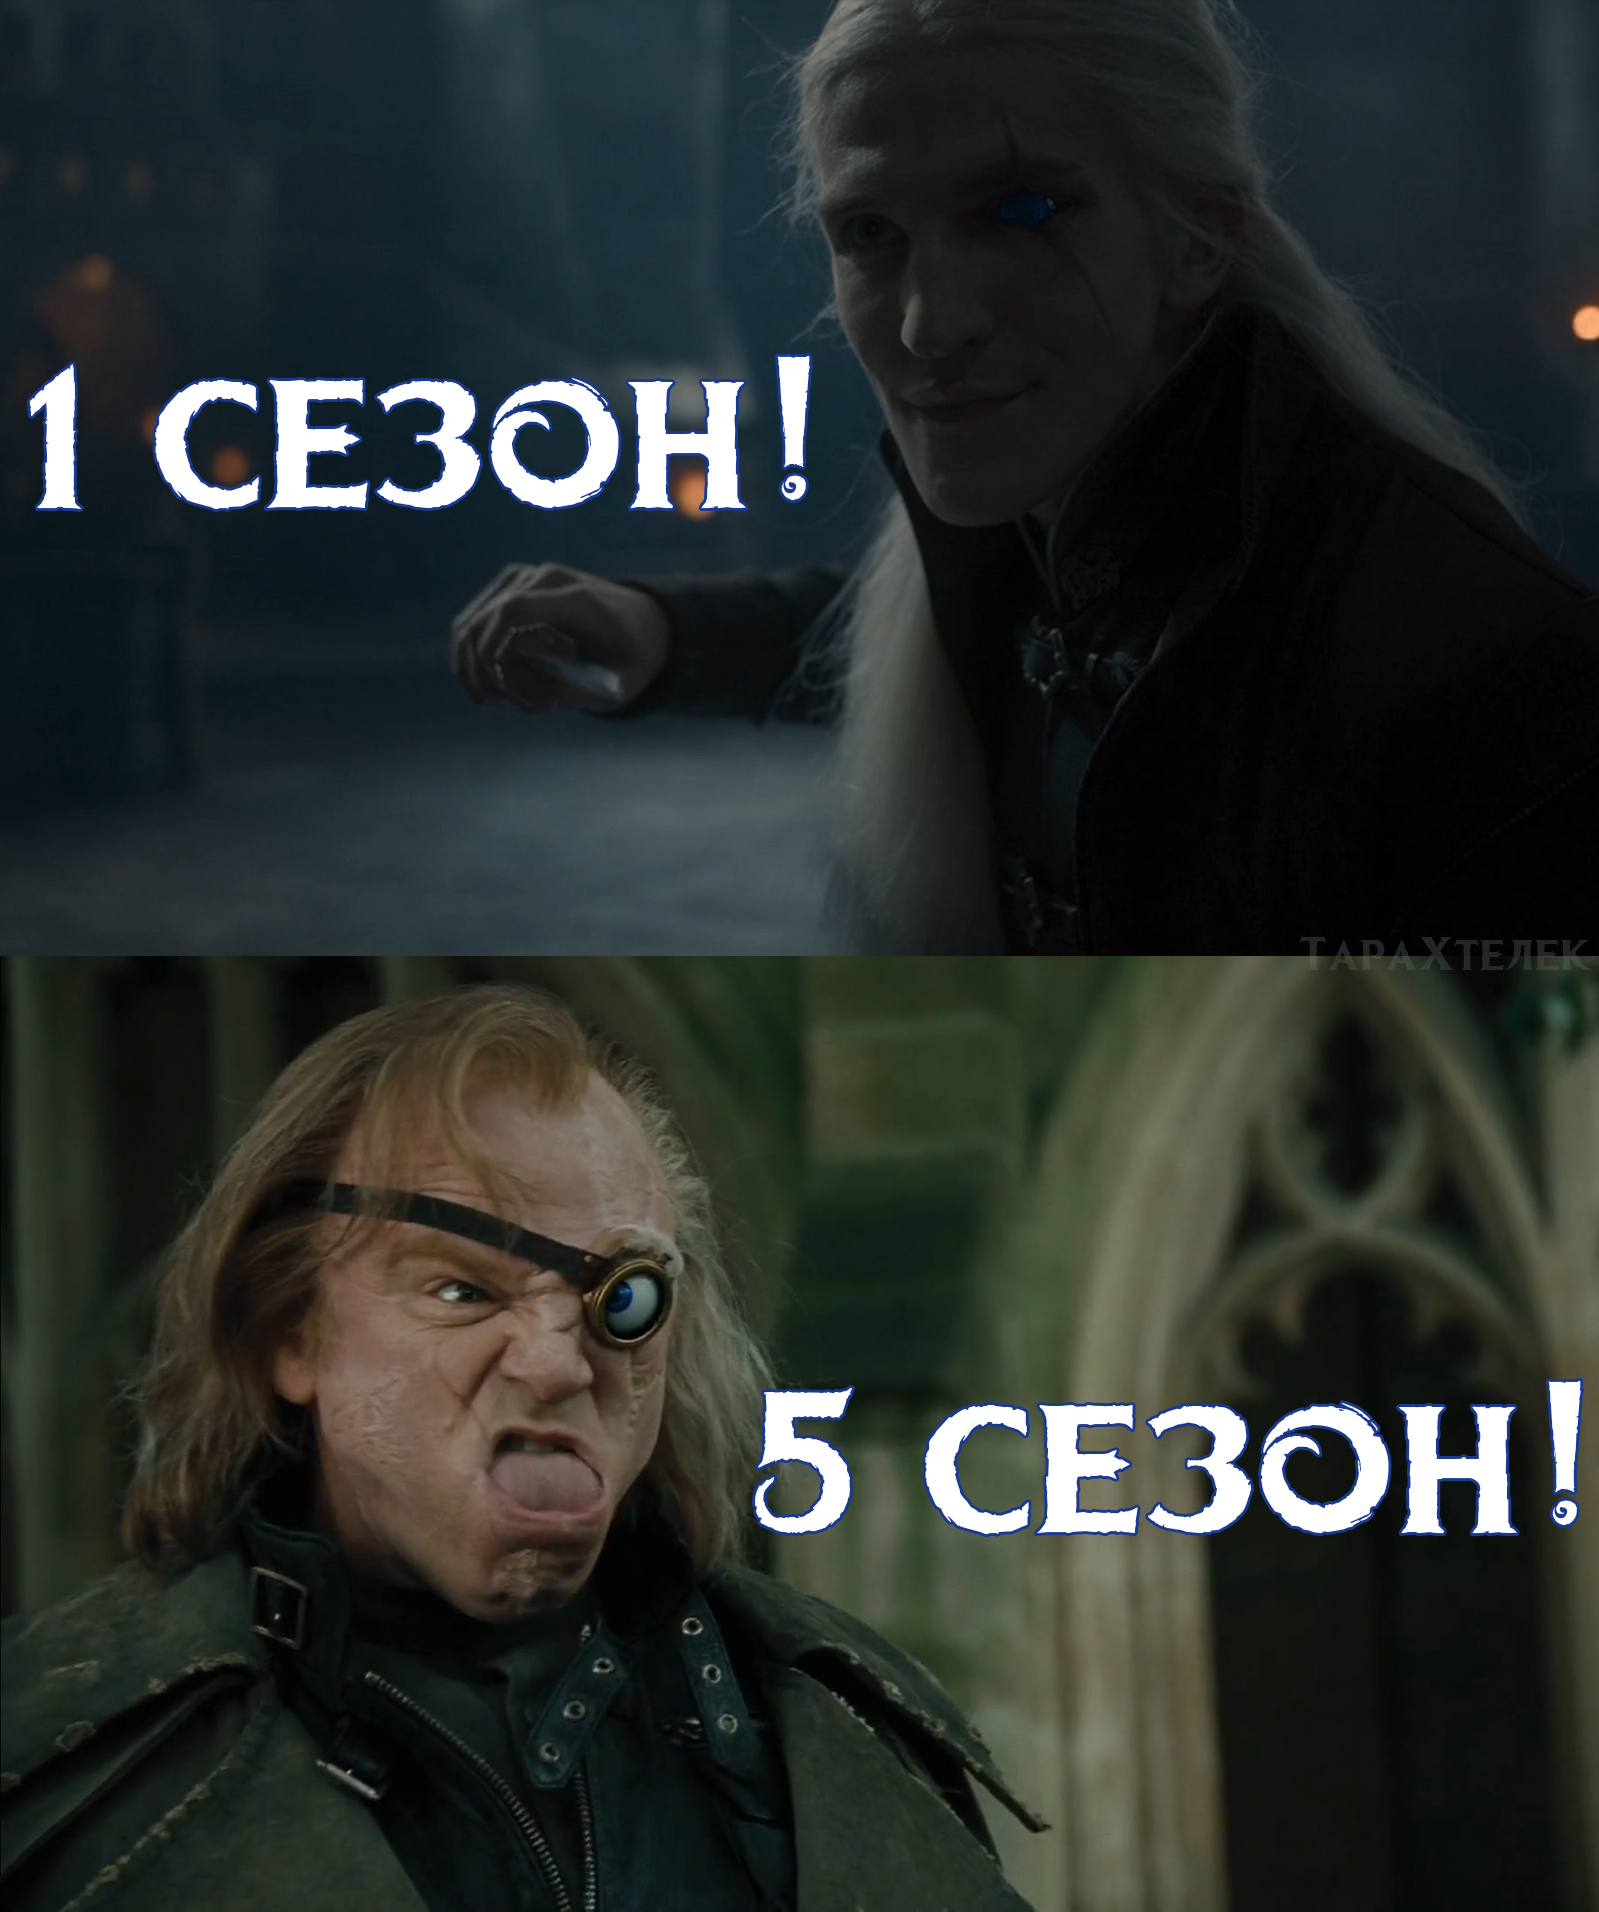 They change so fast! - My, Humor, Picture with text, Memes, Serials, Movies, Harry Potter, Professor Grum, Aymond Targaryen